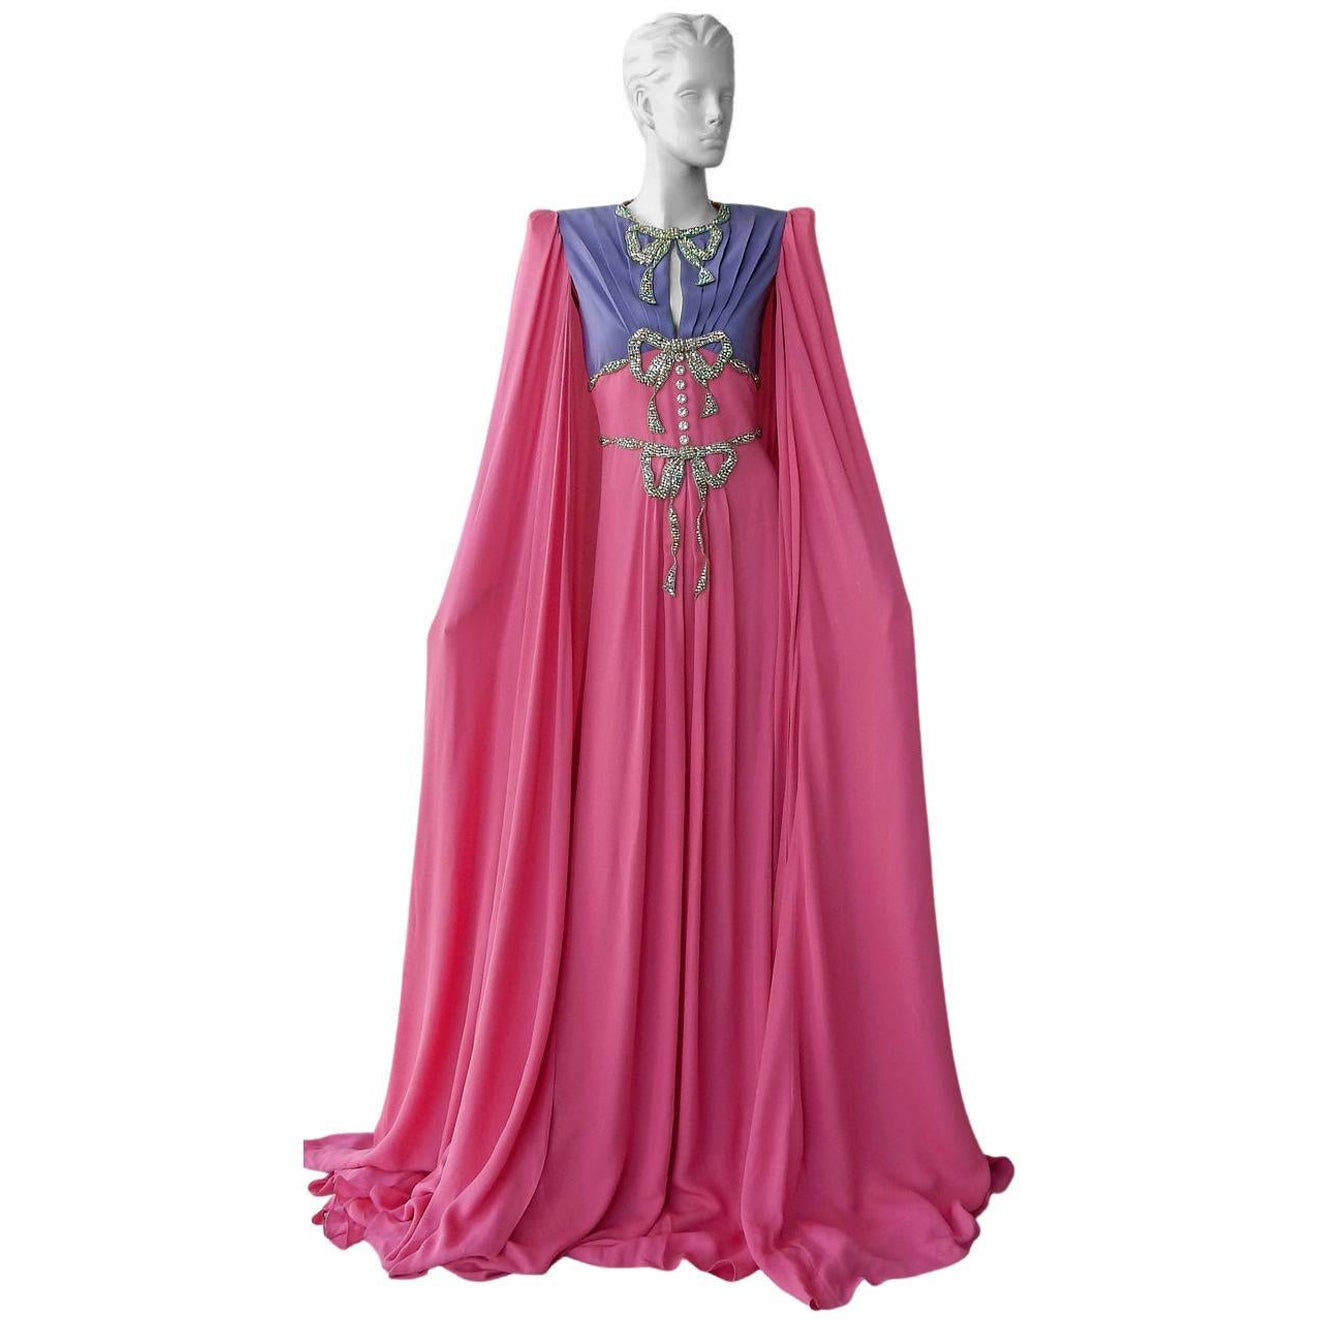 Gucci Runway Fairy Tale Embellished Dress Gown   